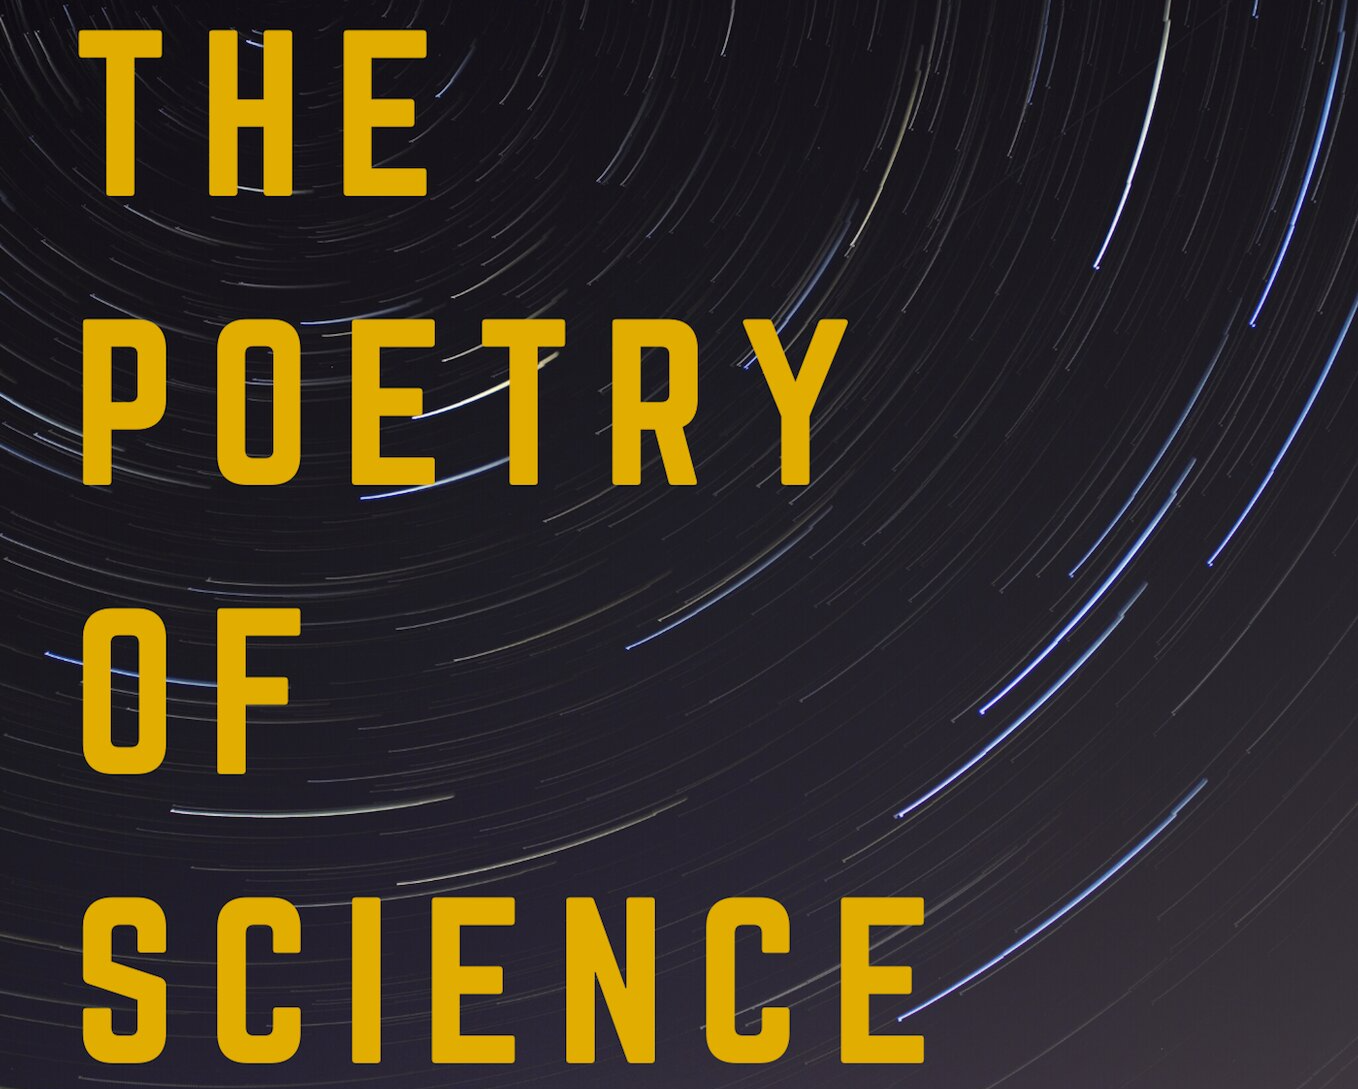 The logo for the weekly podcast ‘The Poetry of Science’, by Dr Sam Illingwoth, who creates poetry inspired by recent scientific discoveries and ideas. 